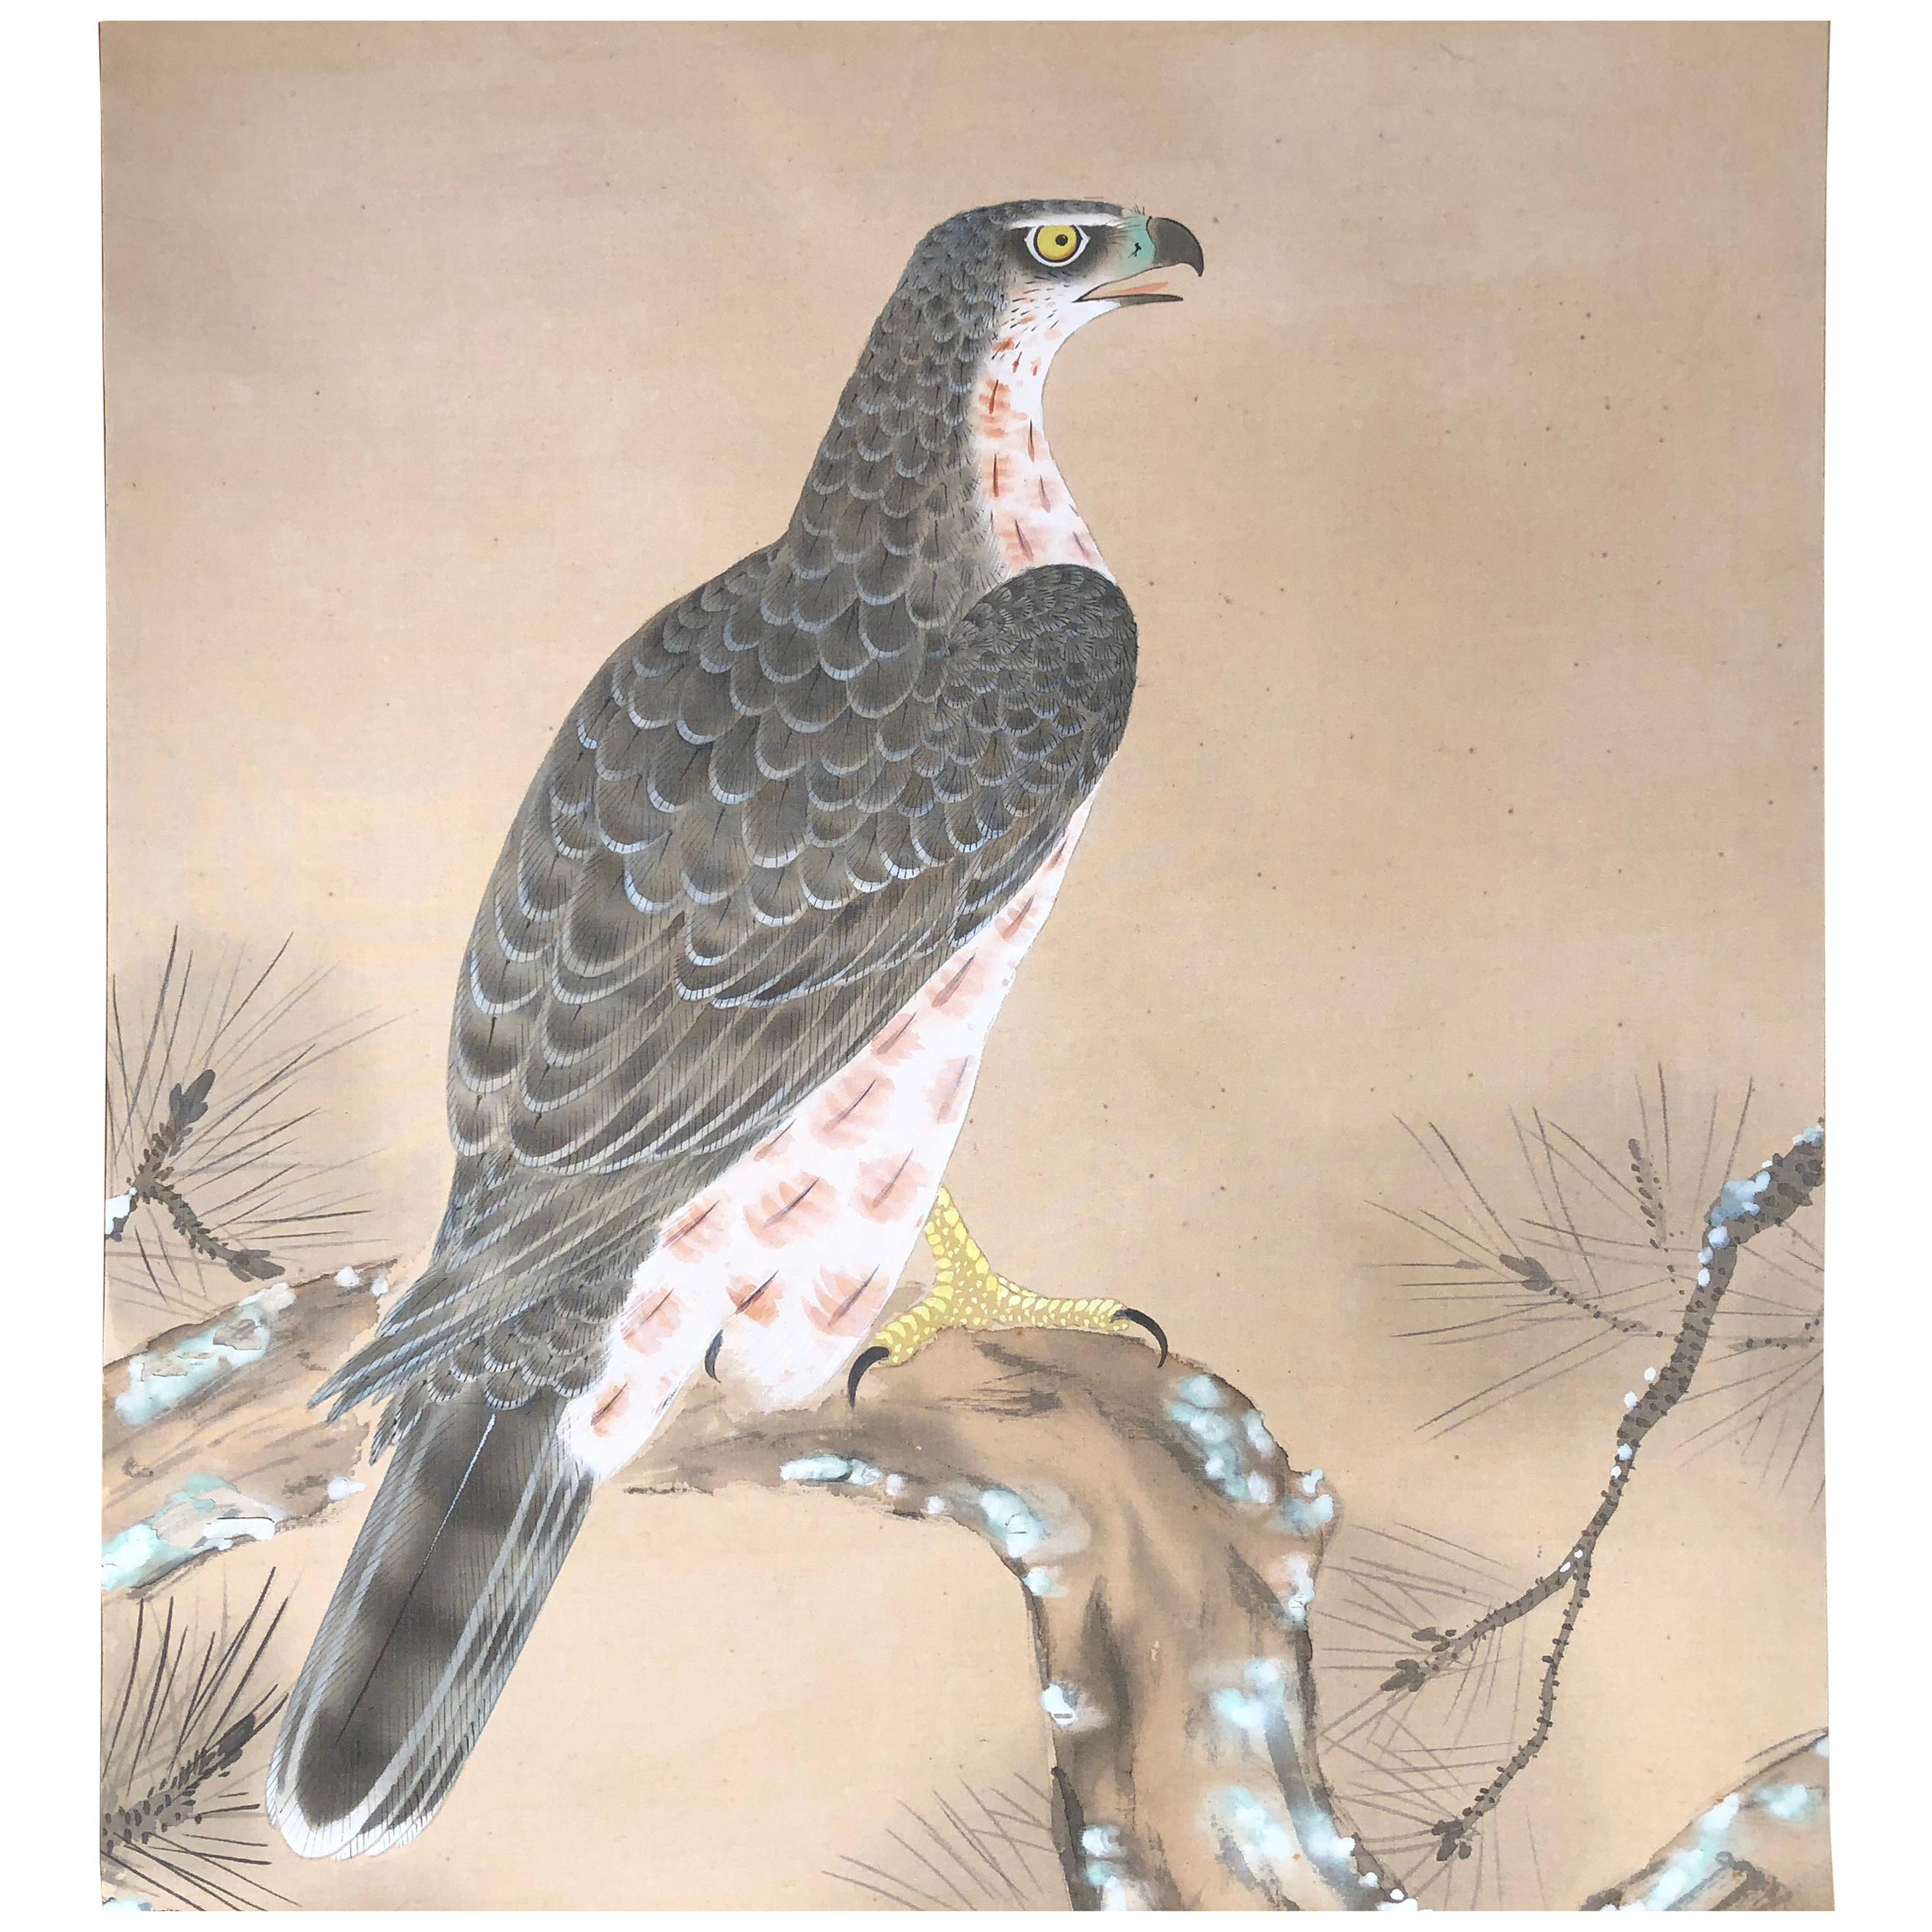 A very fine and delicate Japanese antique hand painted silk scroll of nature's king of birds, the eagle perched a top a tree, from circa 1930.

Hand painting in lively colors with great details, signed.

Old bone rollers and silk